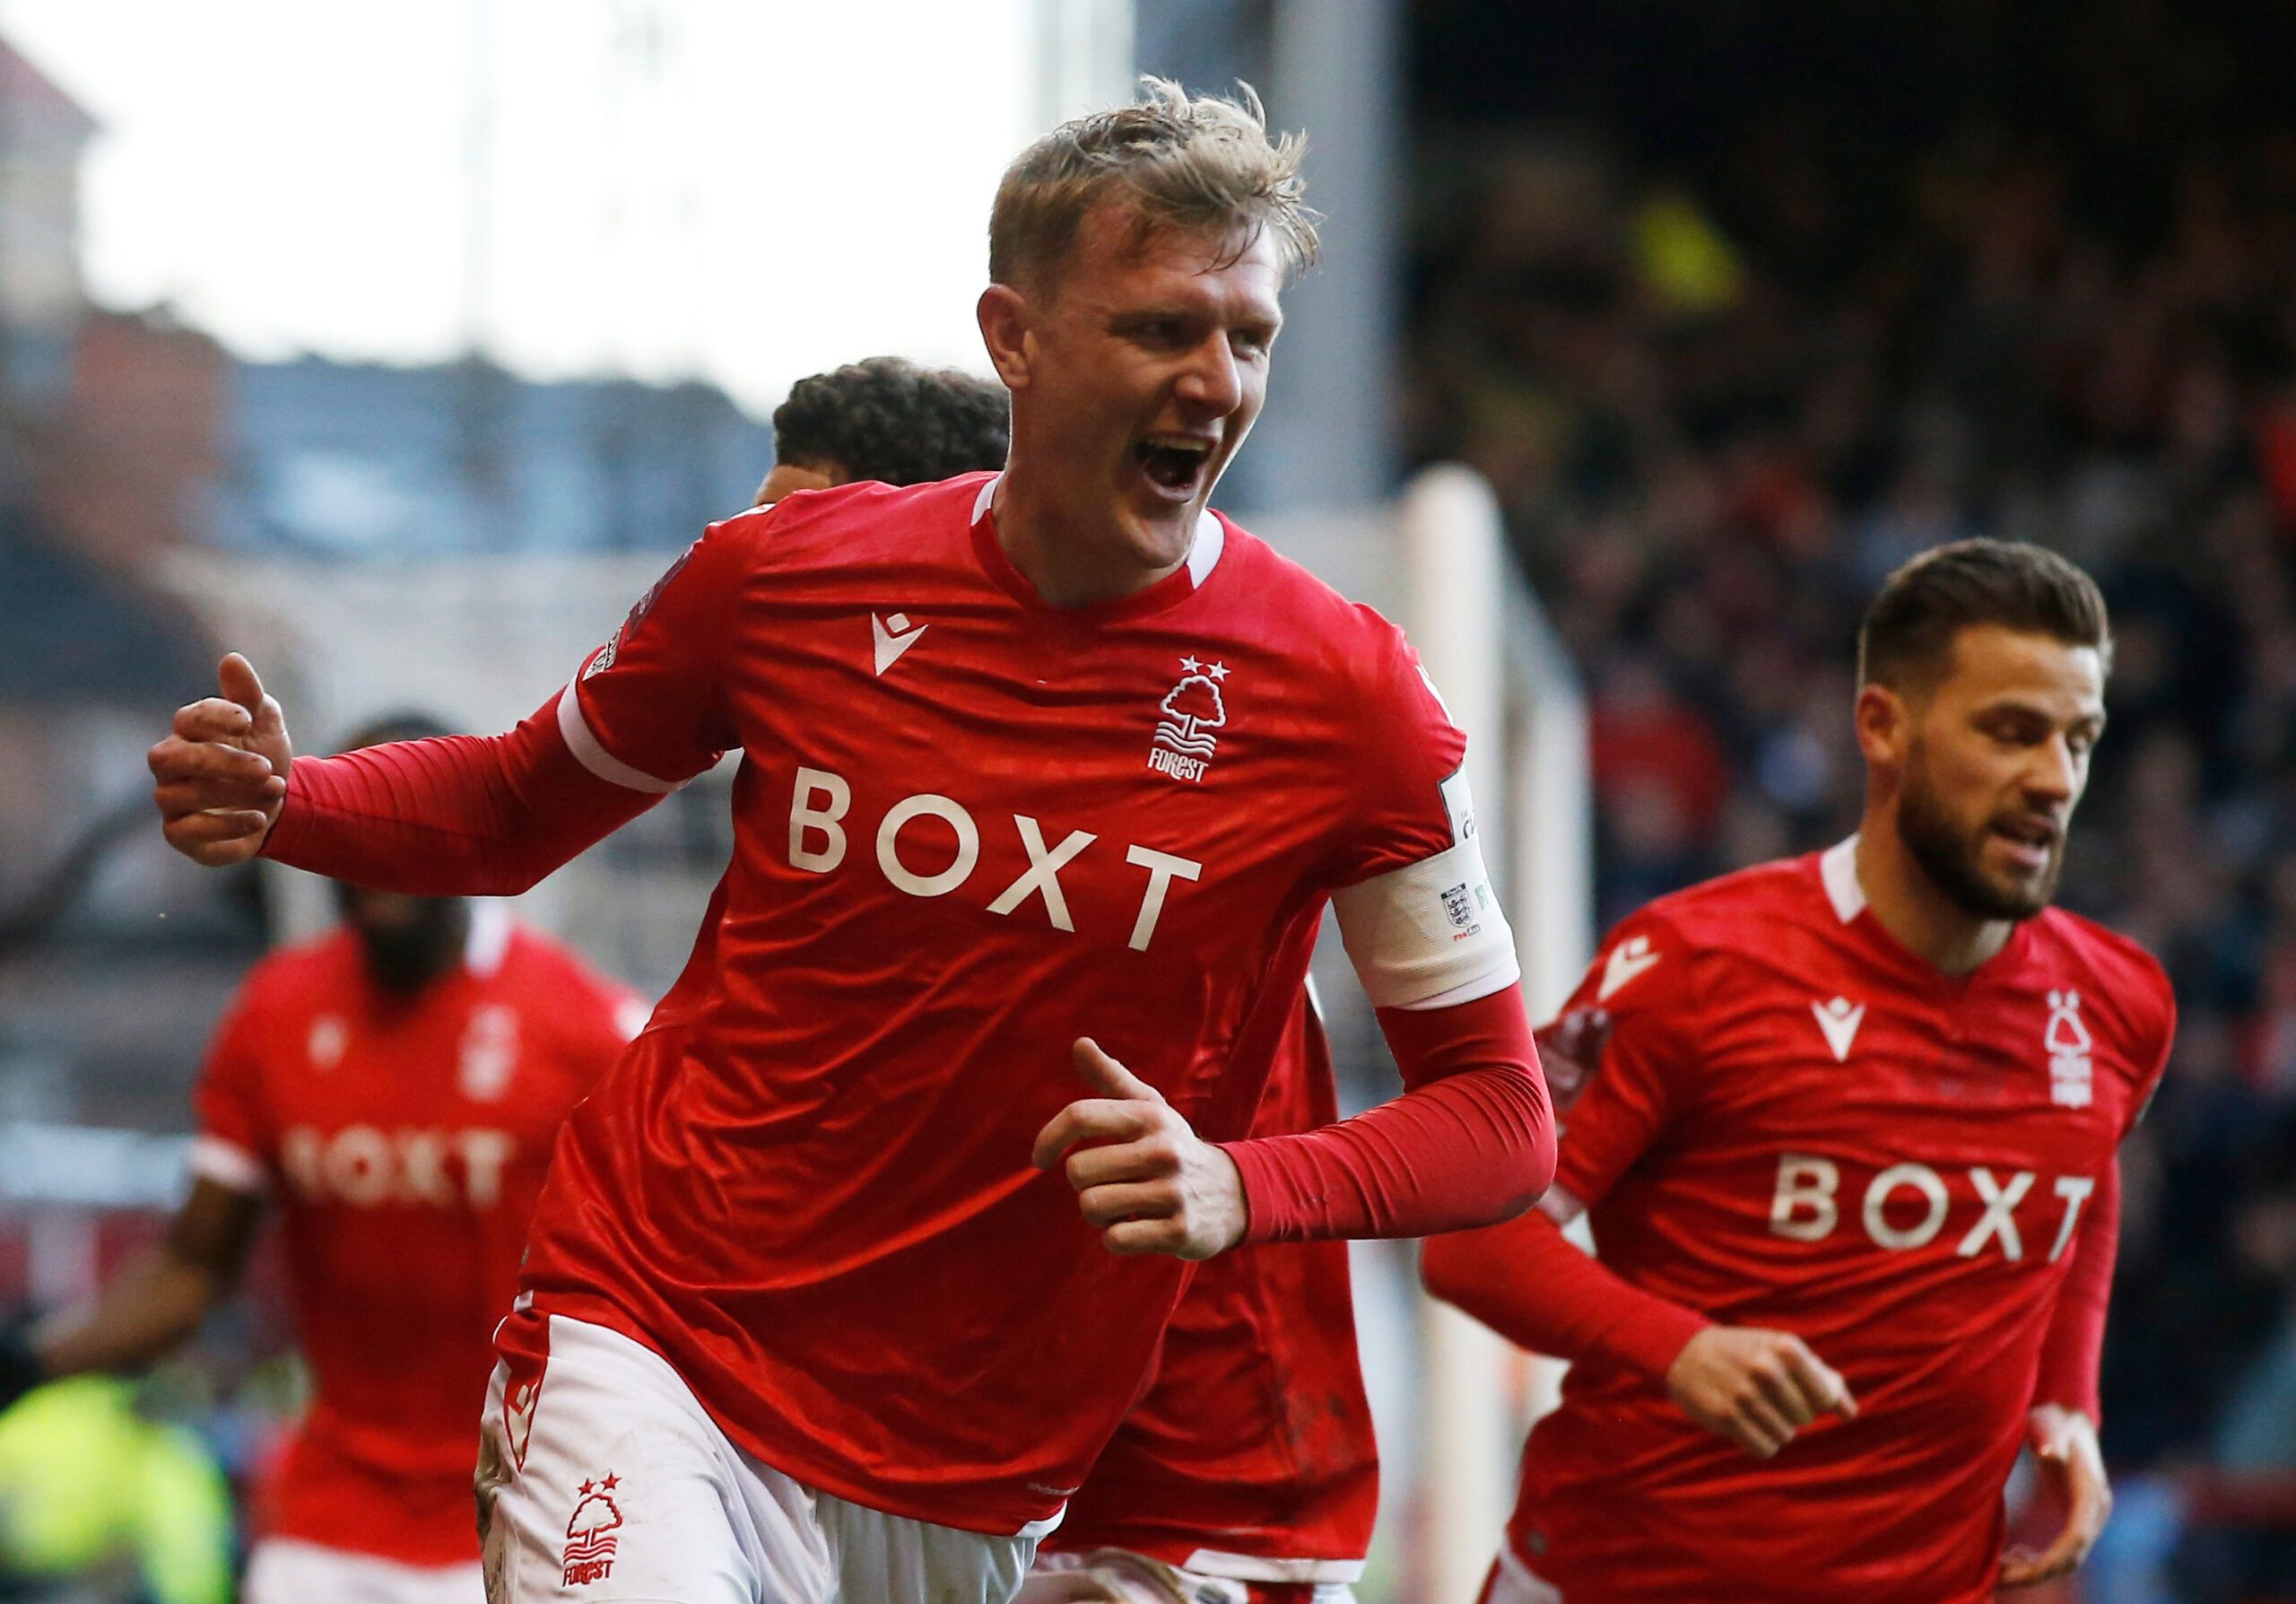 Soccer Football - FA Cup - Fourth Round - Nottingham Forest v Leicester City - The City Ground, Nottingham, Britain - February 6, 2022 Nottingham Forest's Joe Worrall celebrates scoring their third goal REUTERS/Craig Brough